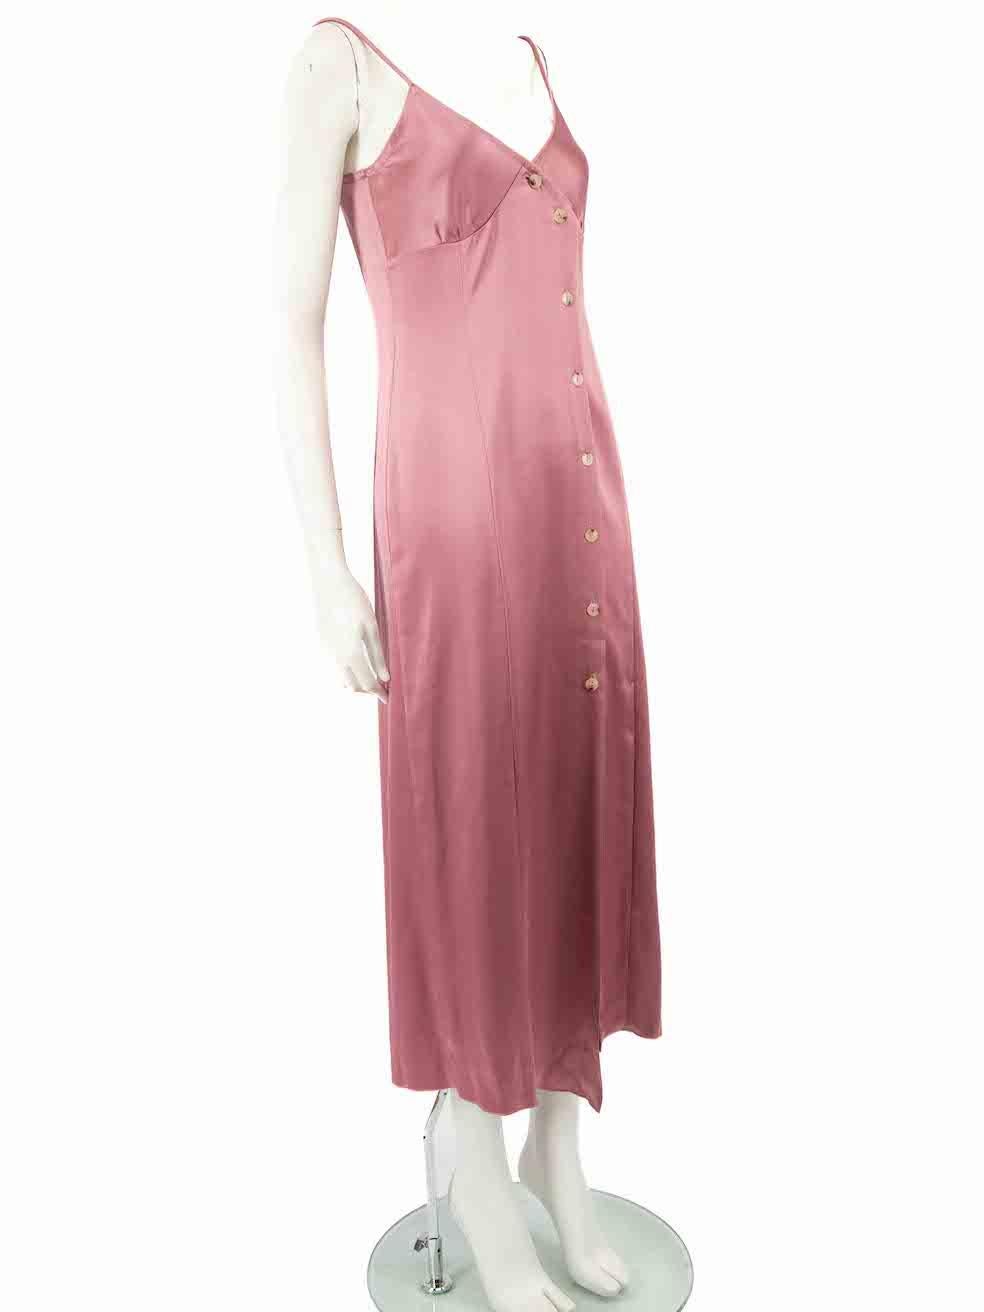 CONDITION is Good. Minor wear to dress is evident. Light wear to the front with plucks to the weave and the bottom button has a tear to the satin at the attached stitching on this used NANUSHKA designer resale item.
 
 
 
 Details
 
 
 Pink
 
